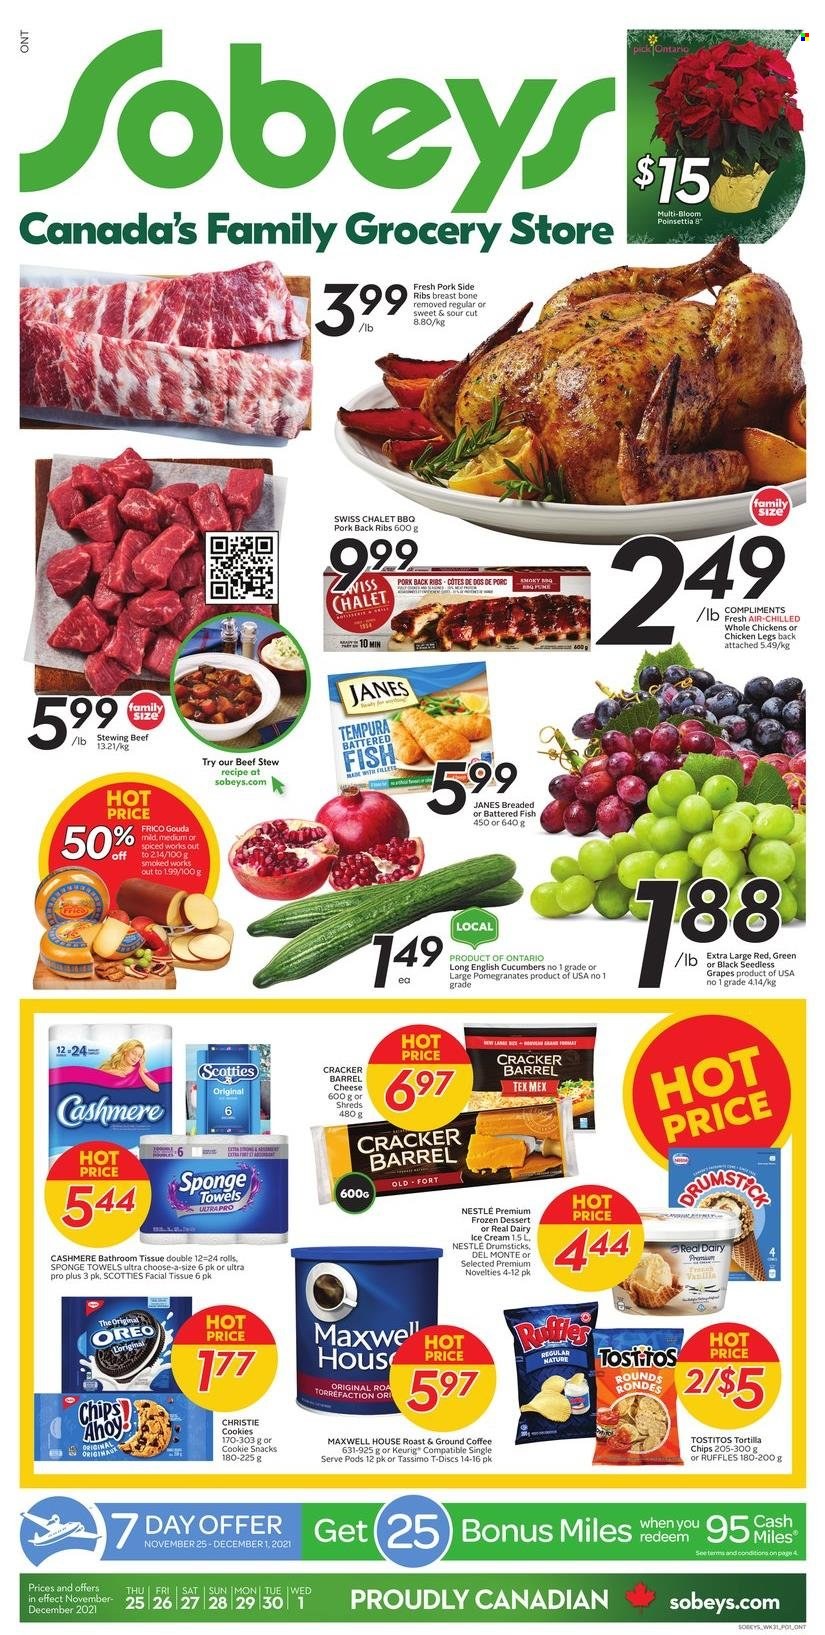 thumbnail - Sobeys Flyer - November 25, 2021 - December 01, 2021 - Sales products - cucumber, grapes, pomegranate, fish, gouda, cheese, ice cream, cookies, snack, crackers, tortilla chips, Ruffles, Tostitos, Maxwell House, coffee, ground coffee, Keurig, whole chicken, chicken legs, chicken, beef meat, stewing beef, pork meat, pork ribs, pork back ribs, bath tissue, Oreo, Nestlé. Page 1.